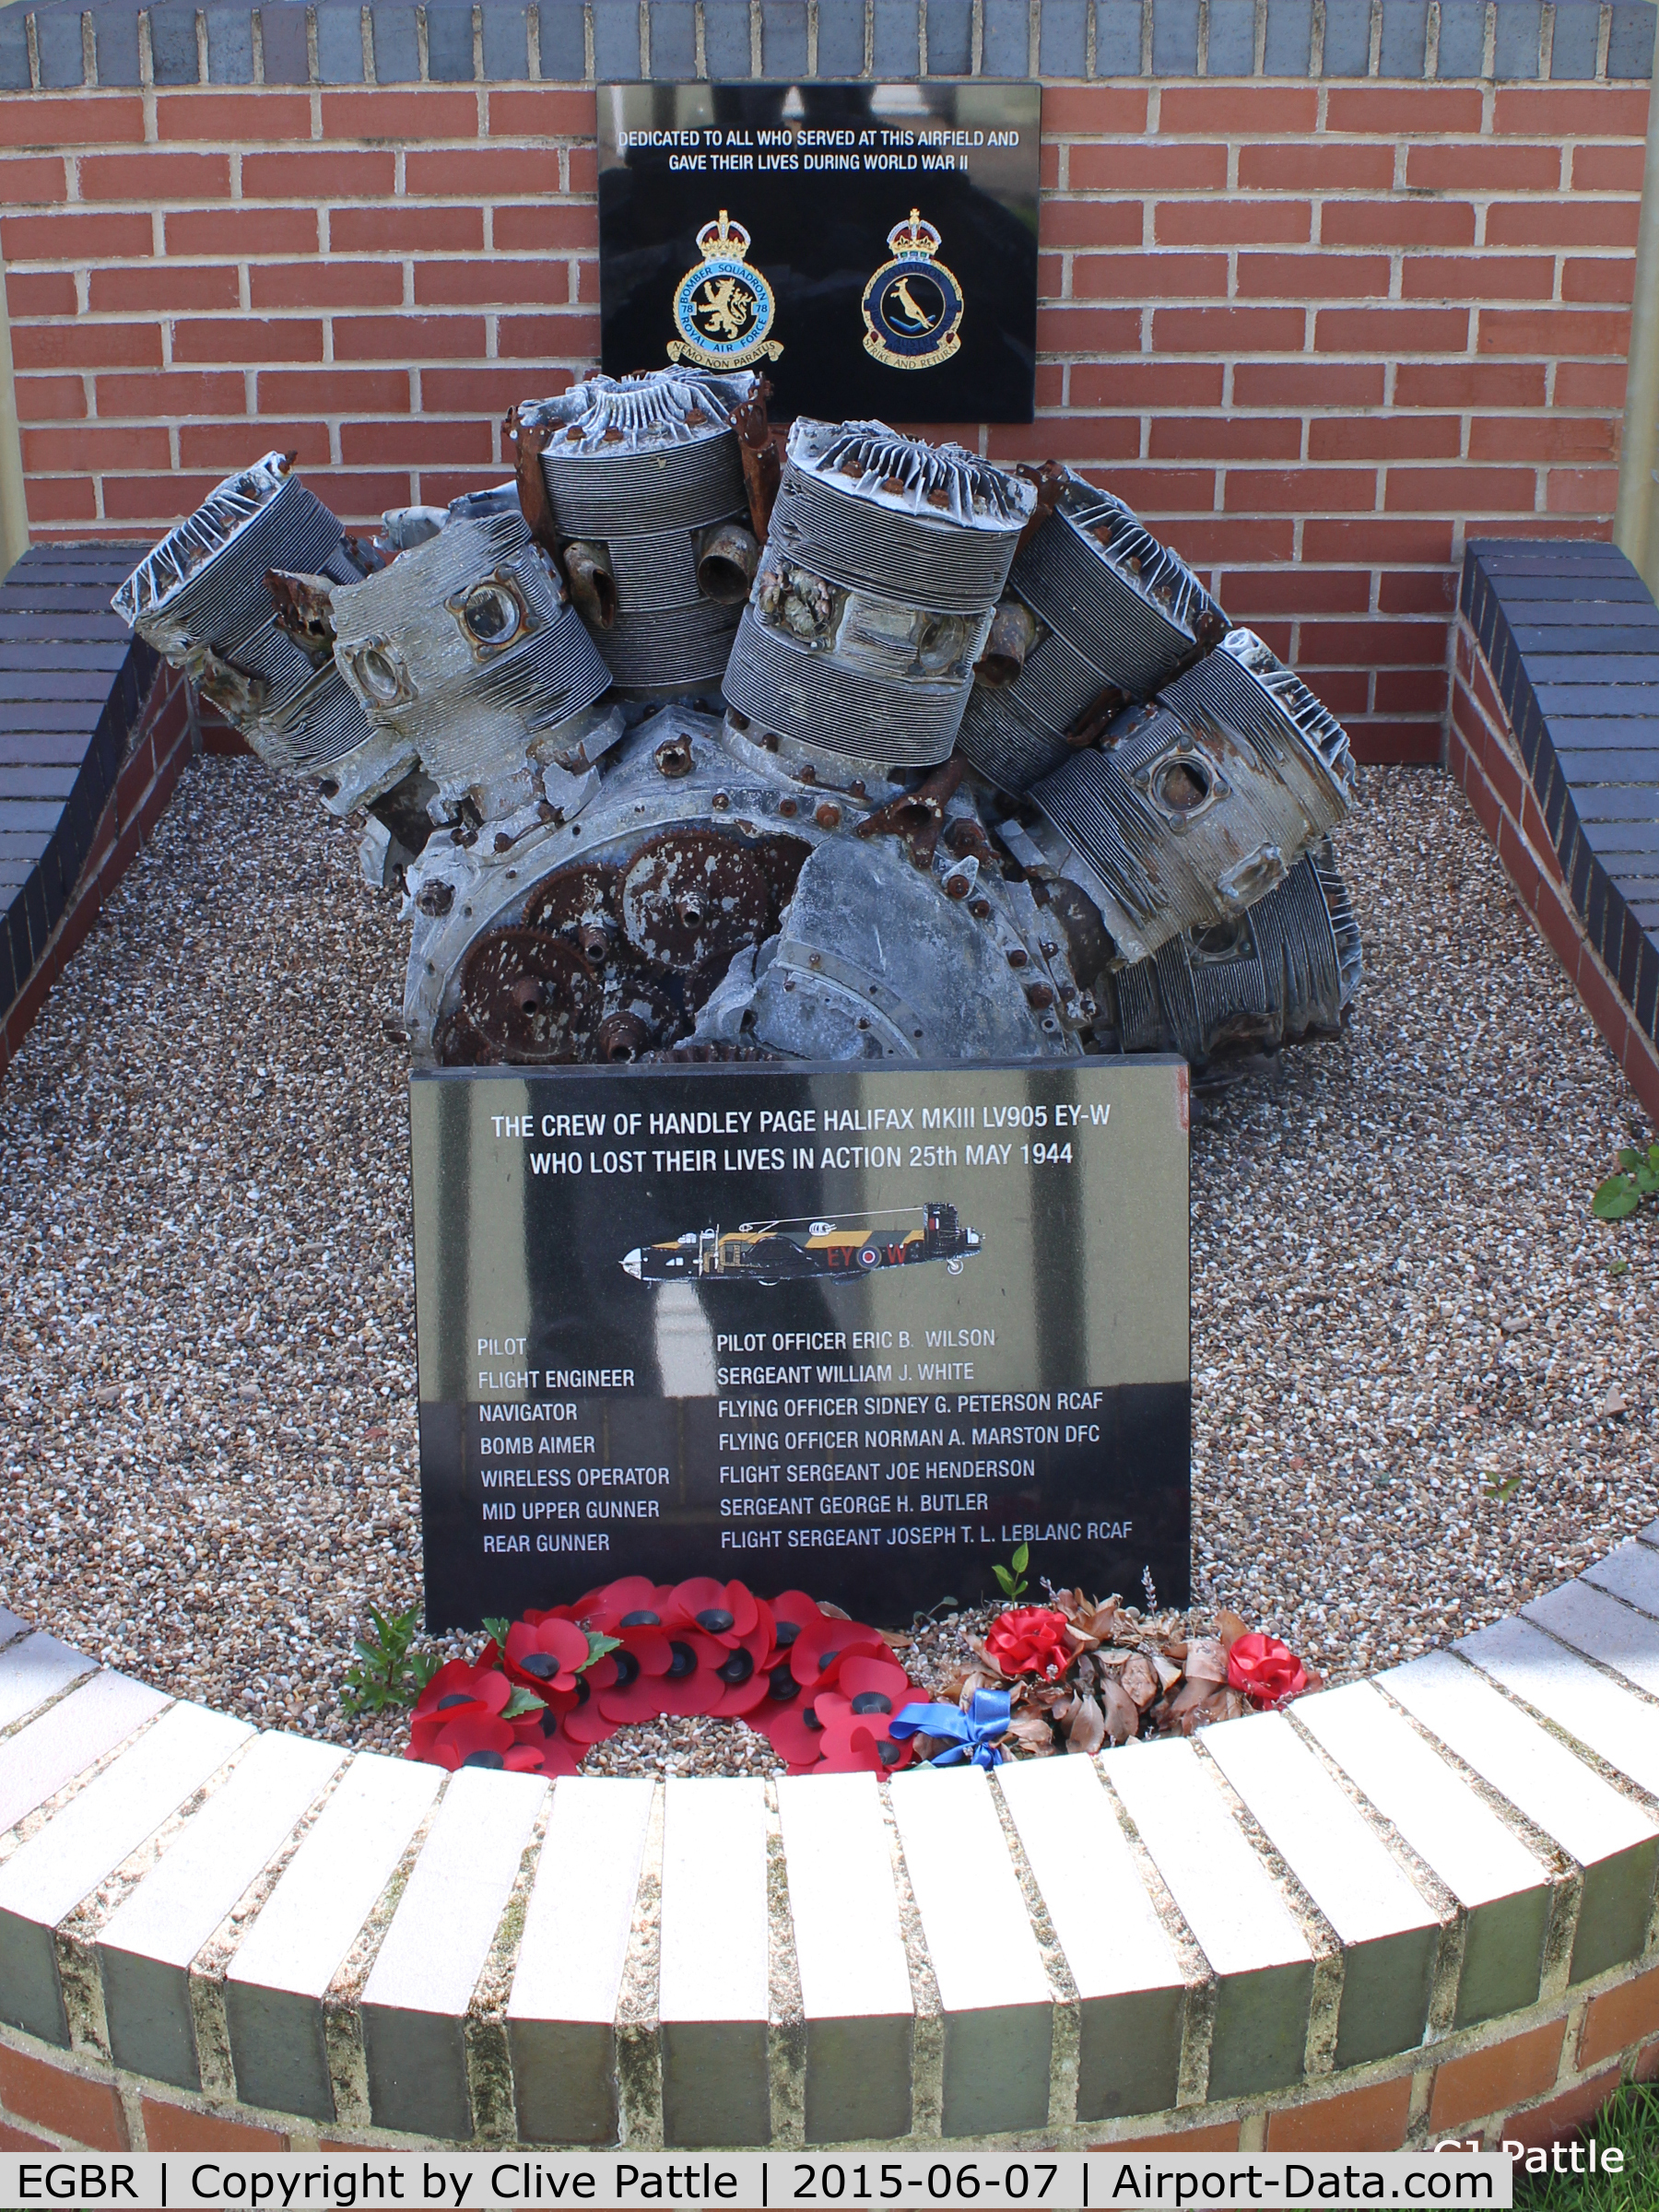 EGBR Airport - Memorial to the crew of Handley Page Halifax LV905 at Breighton Airfield, Yorkshire - EGBR